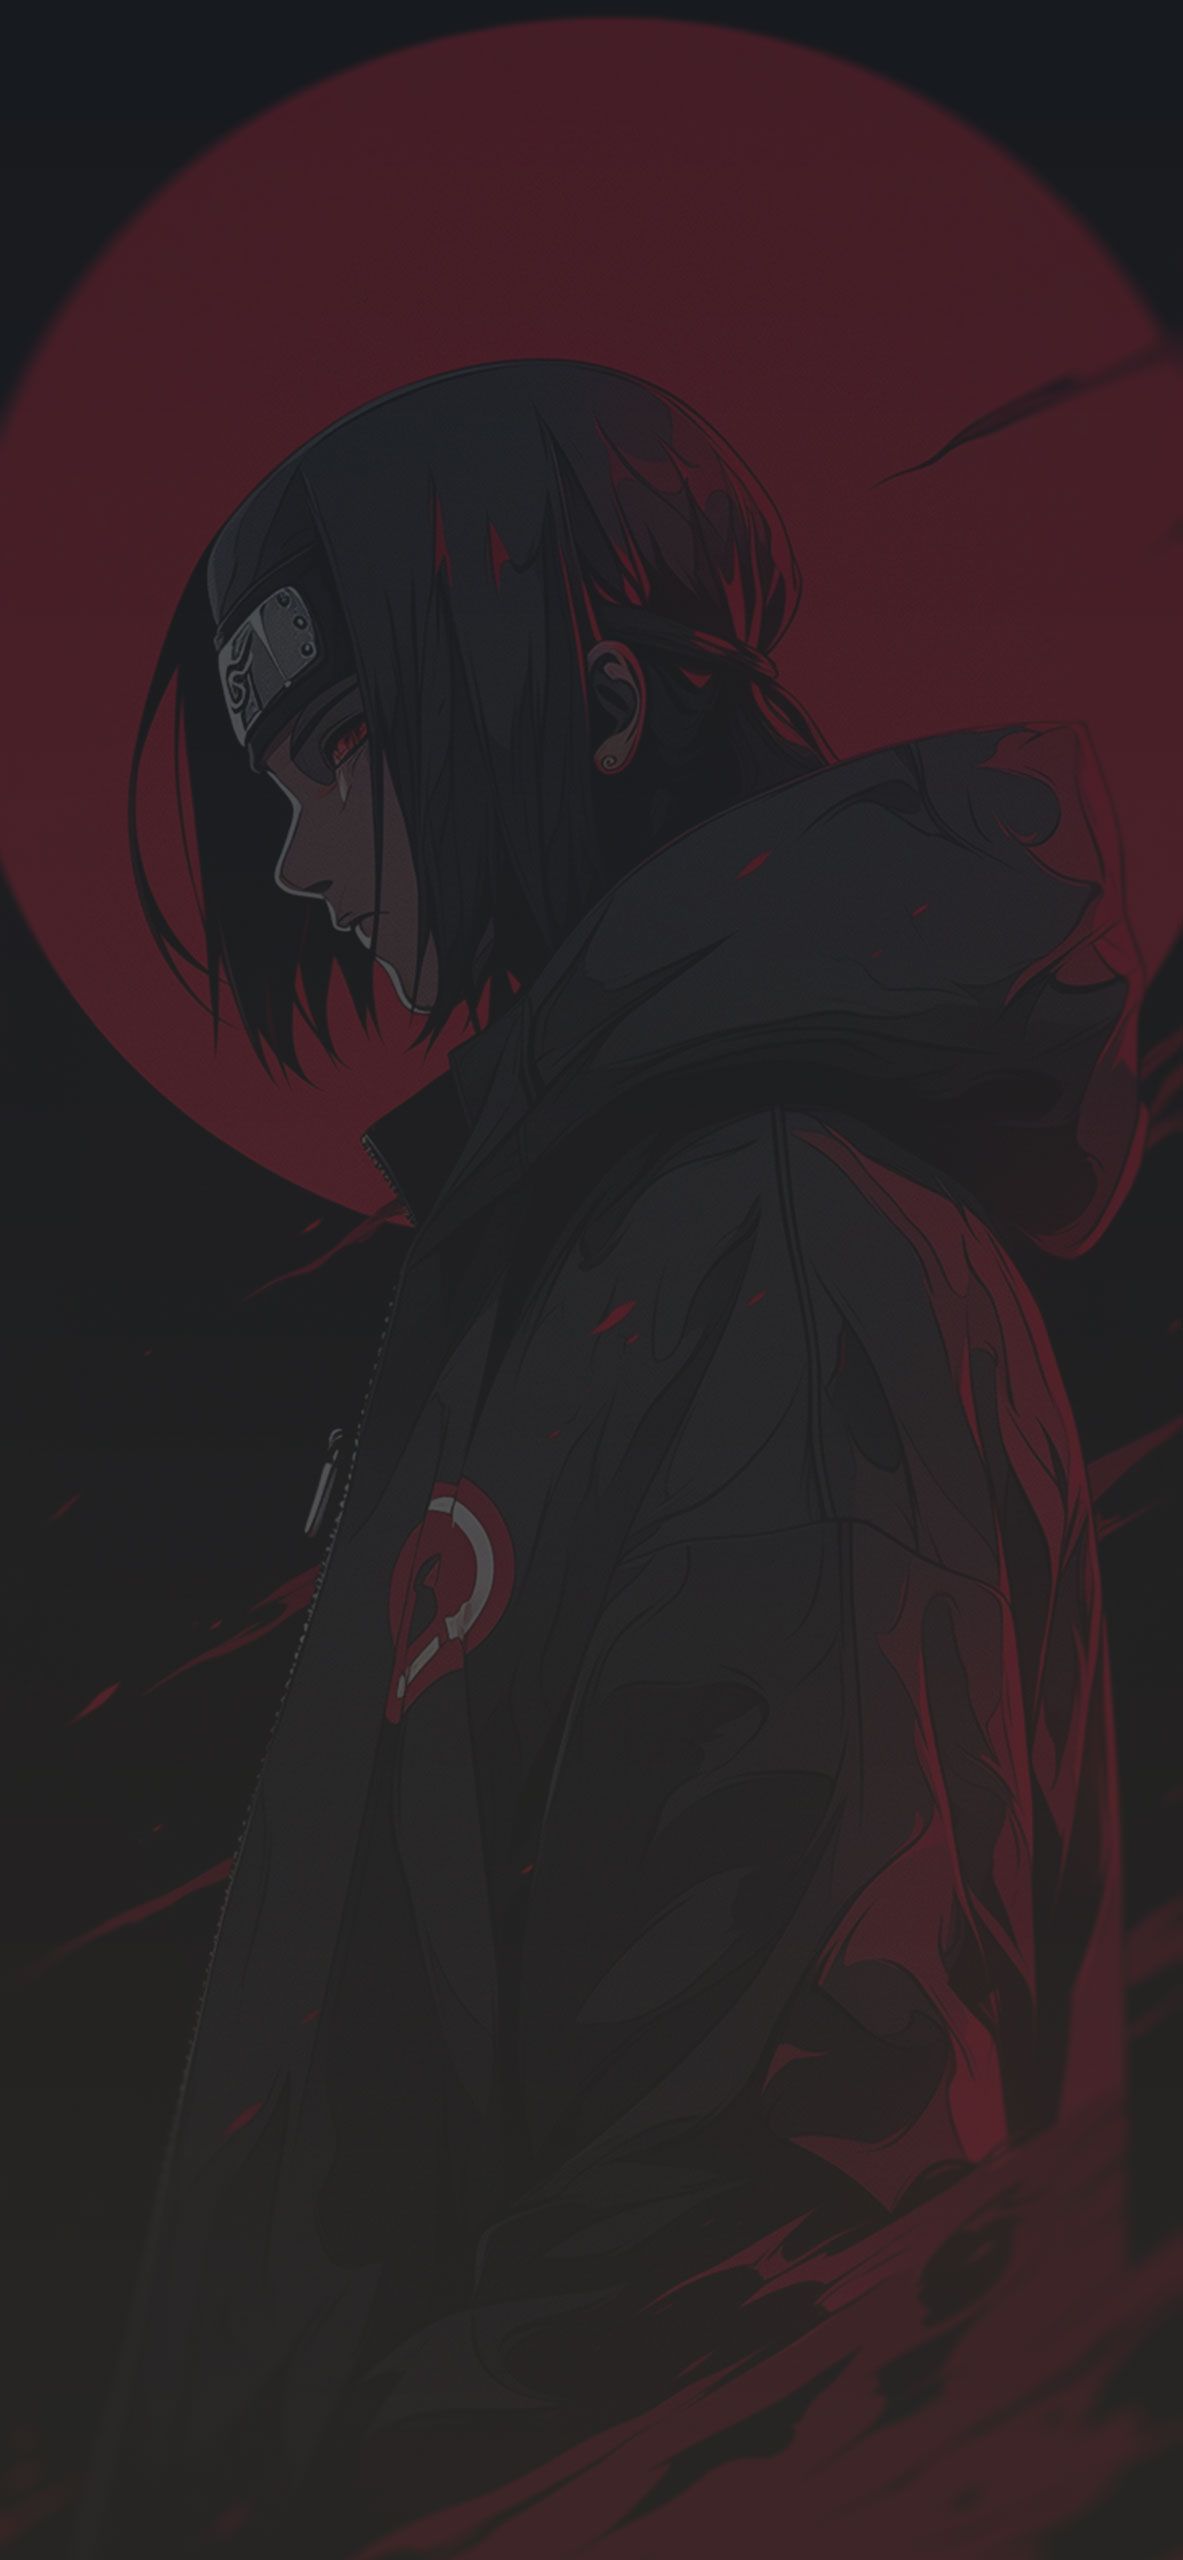 A man with black hair and red eyes - Itachi Uchiha